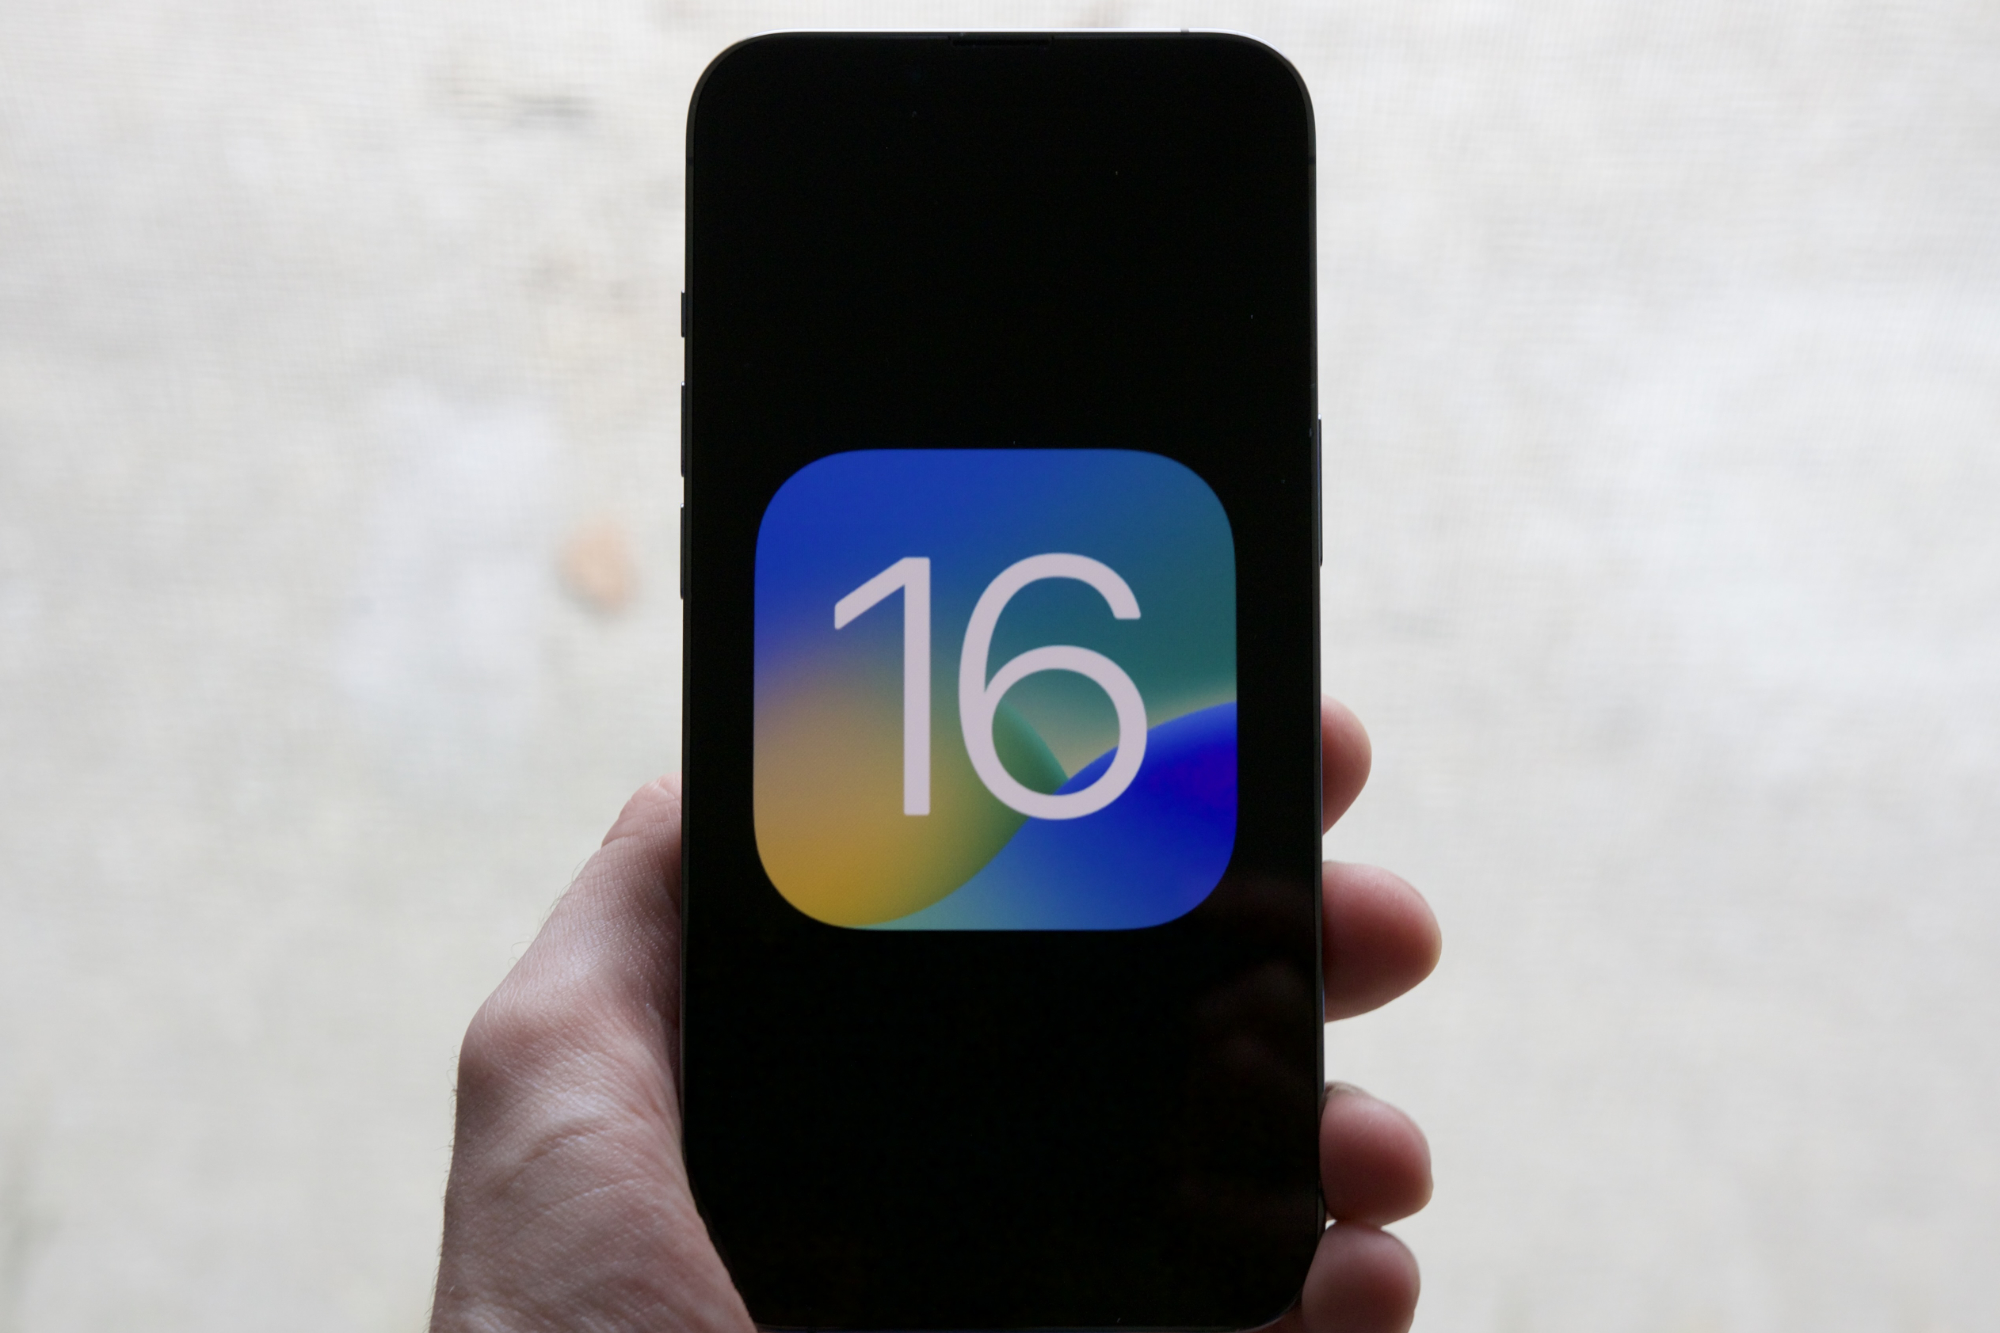 iOS 16 two months later: my 5 favorite things (and 1 I hate)